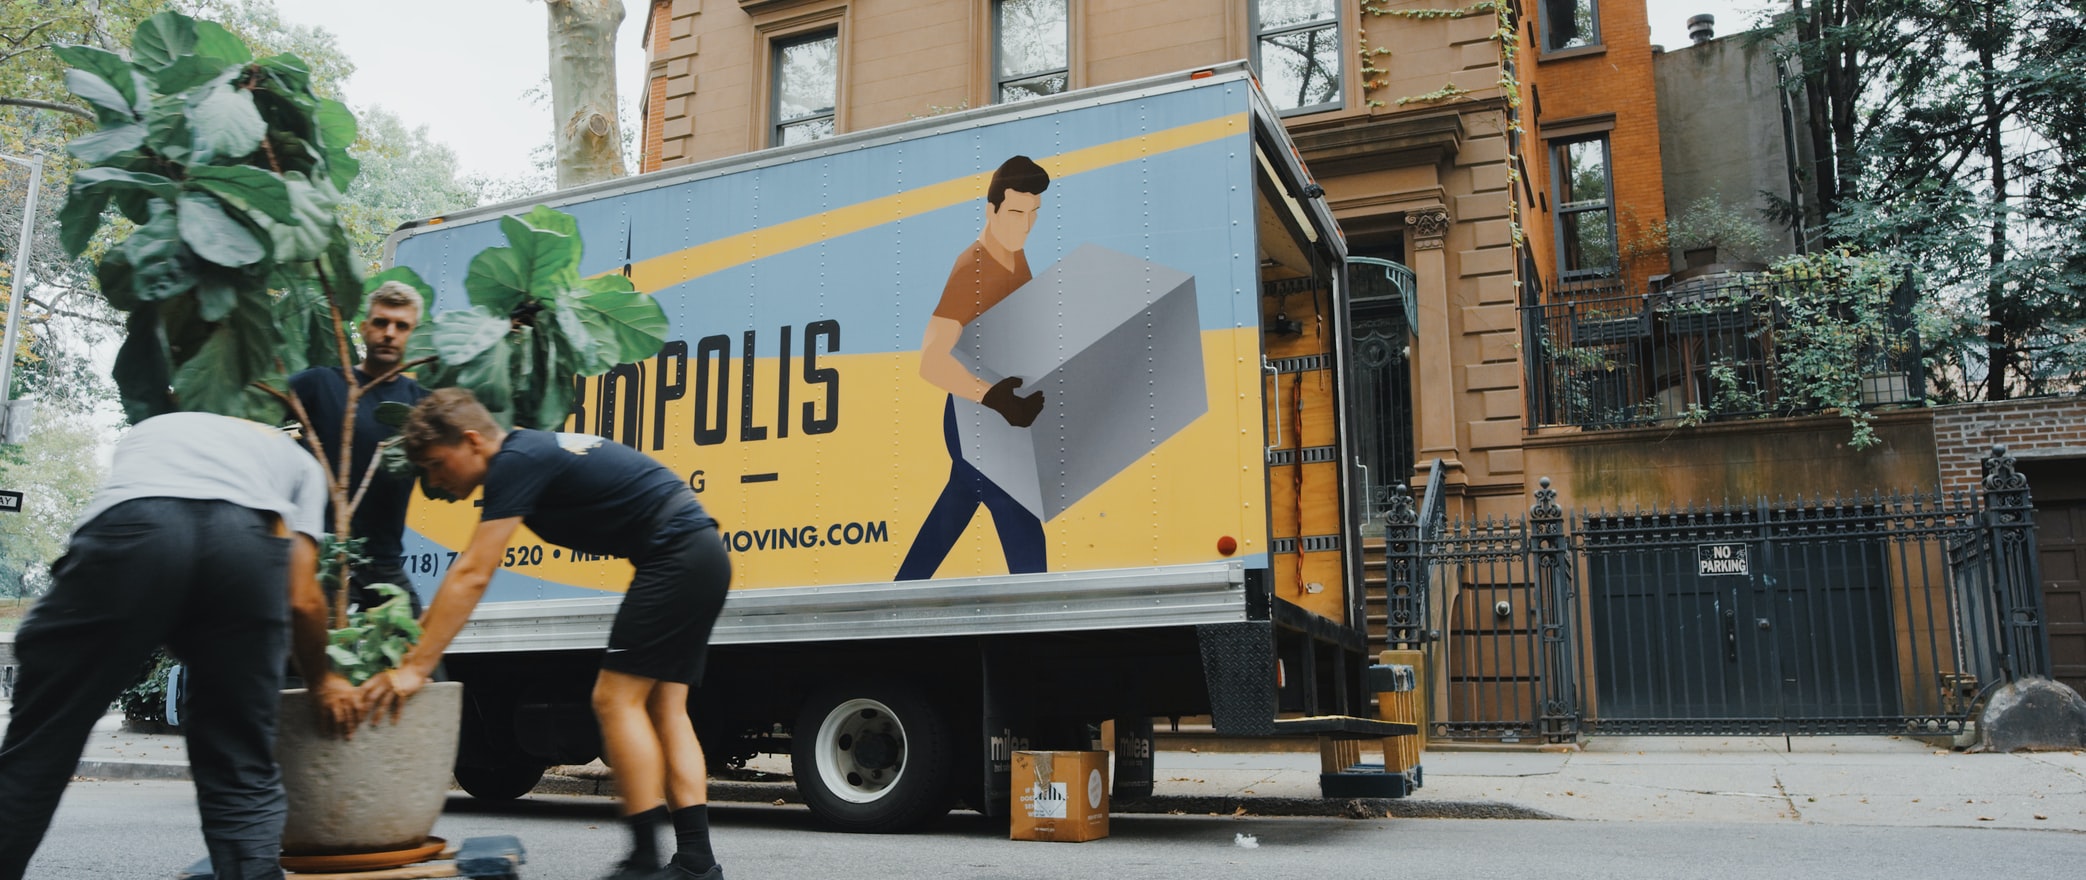 Tips to know when choosing a moving company